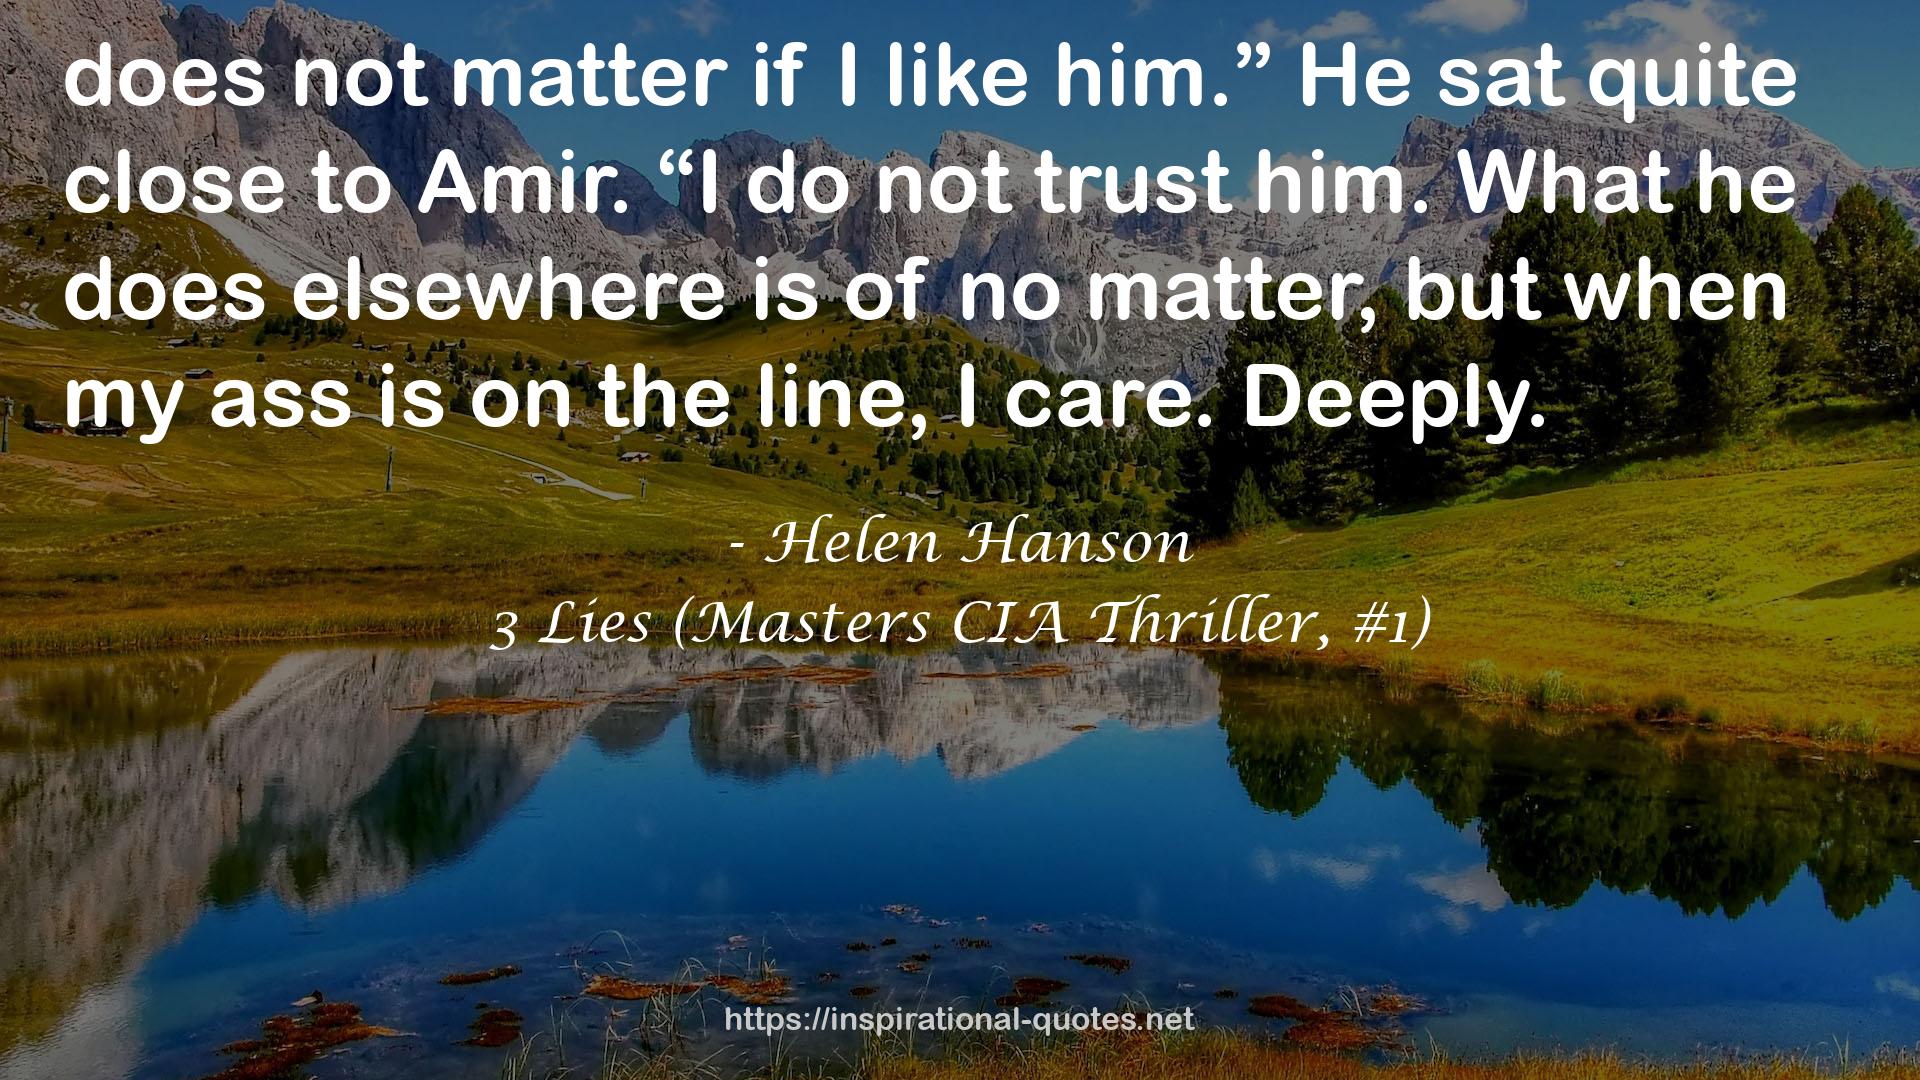 3 Lies (Masters CIA Thriller, #1) QUOTES